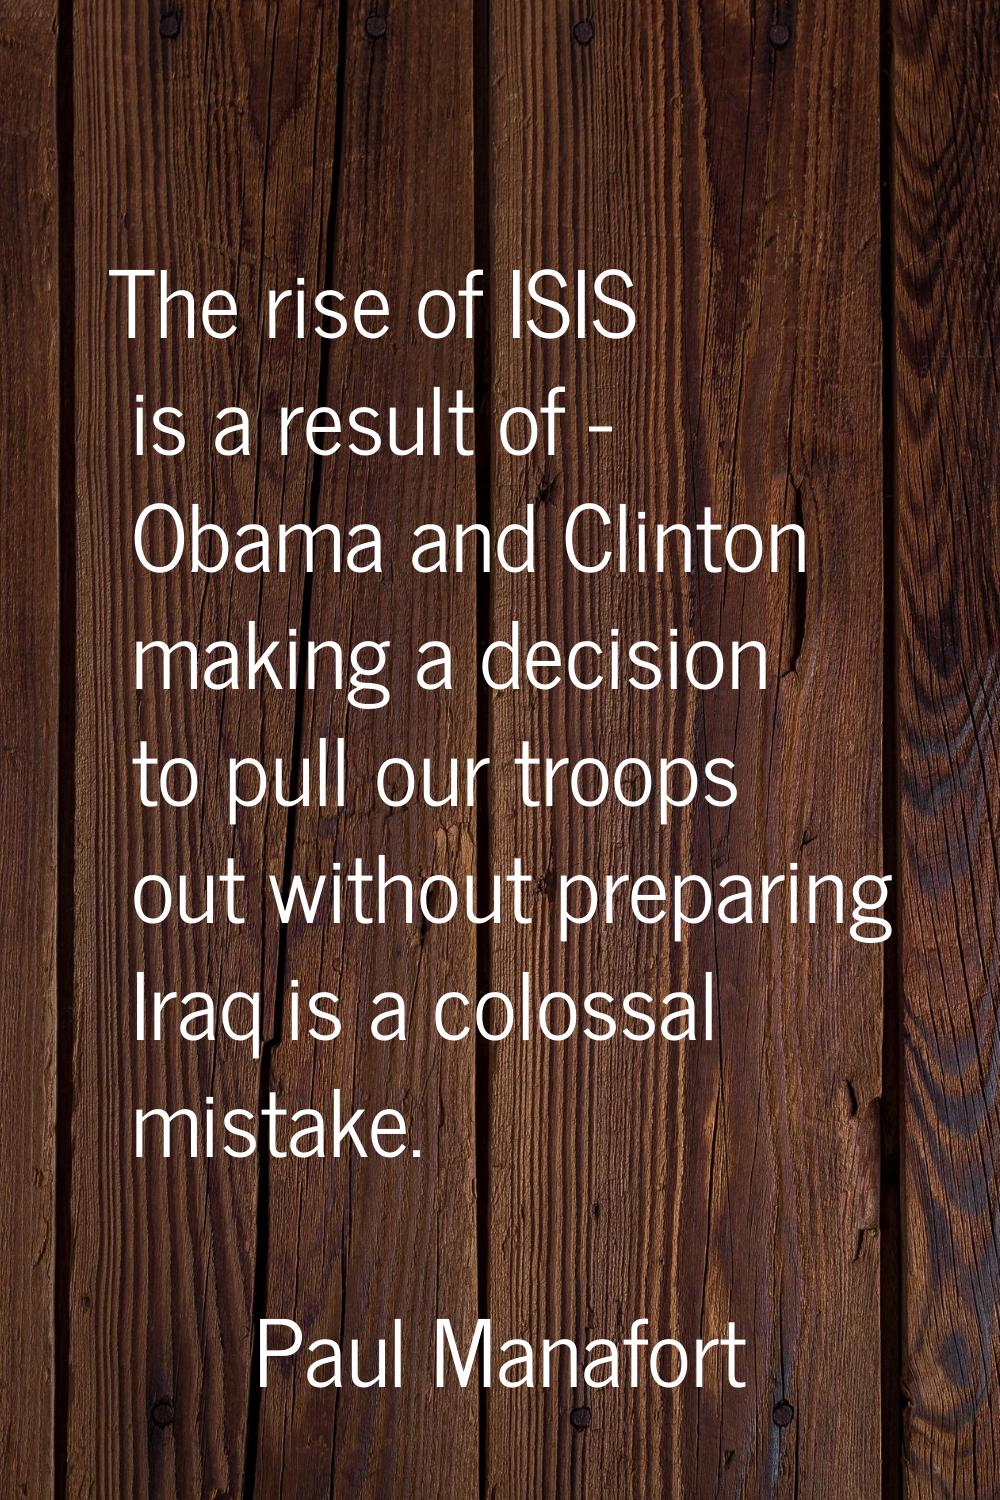 The rise of ISIS is a result of - Obama and Clinton making a decision to pull our troops out withou